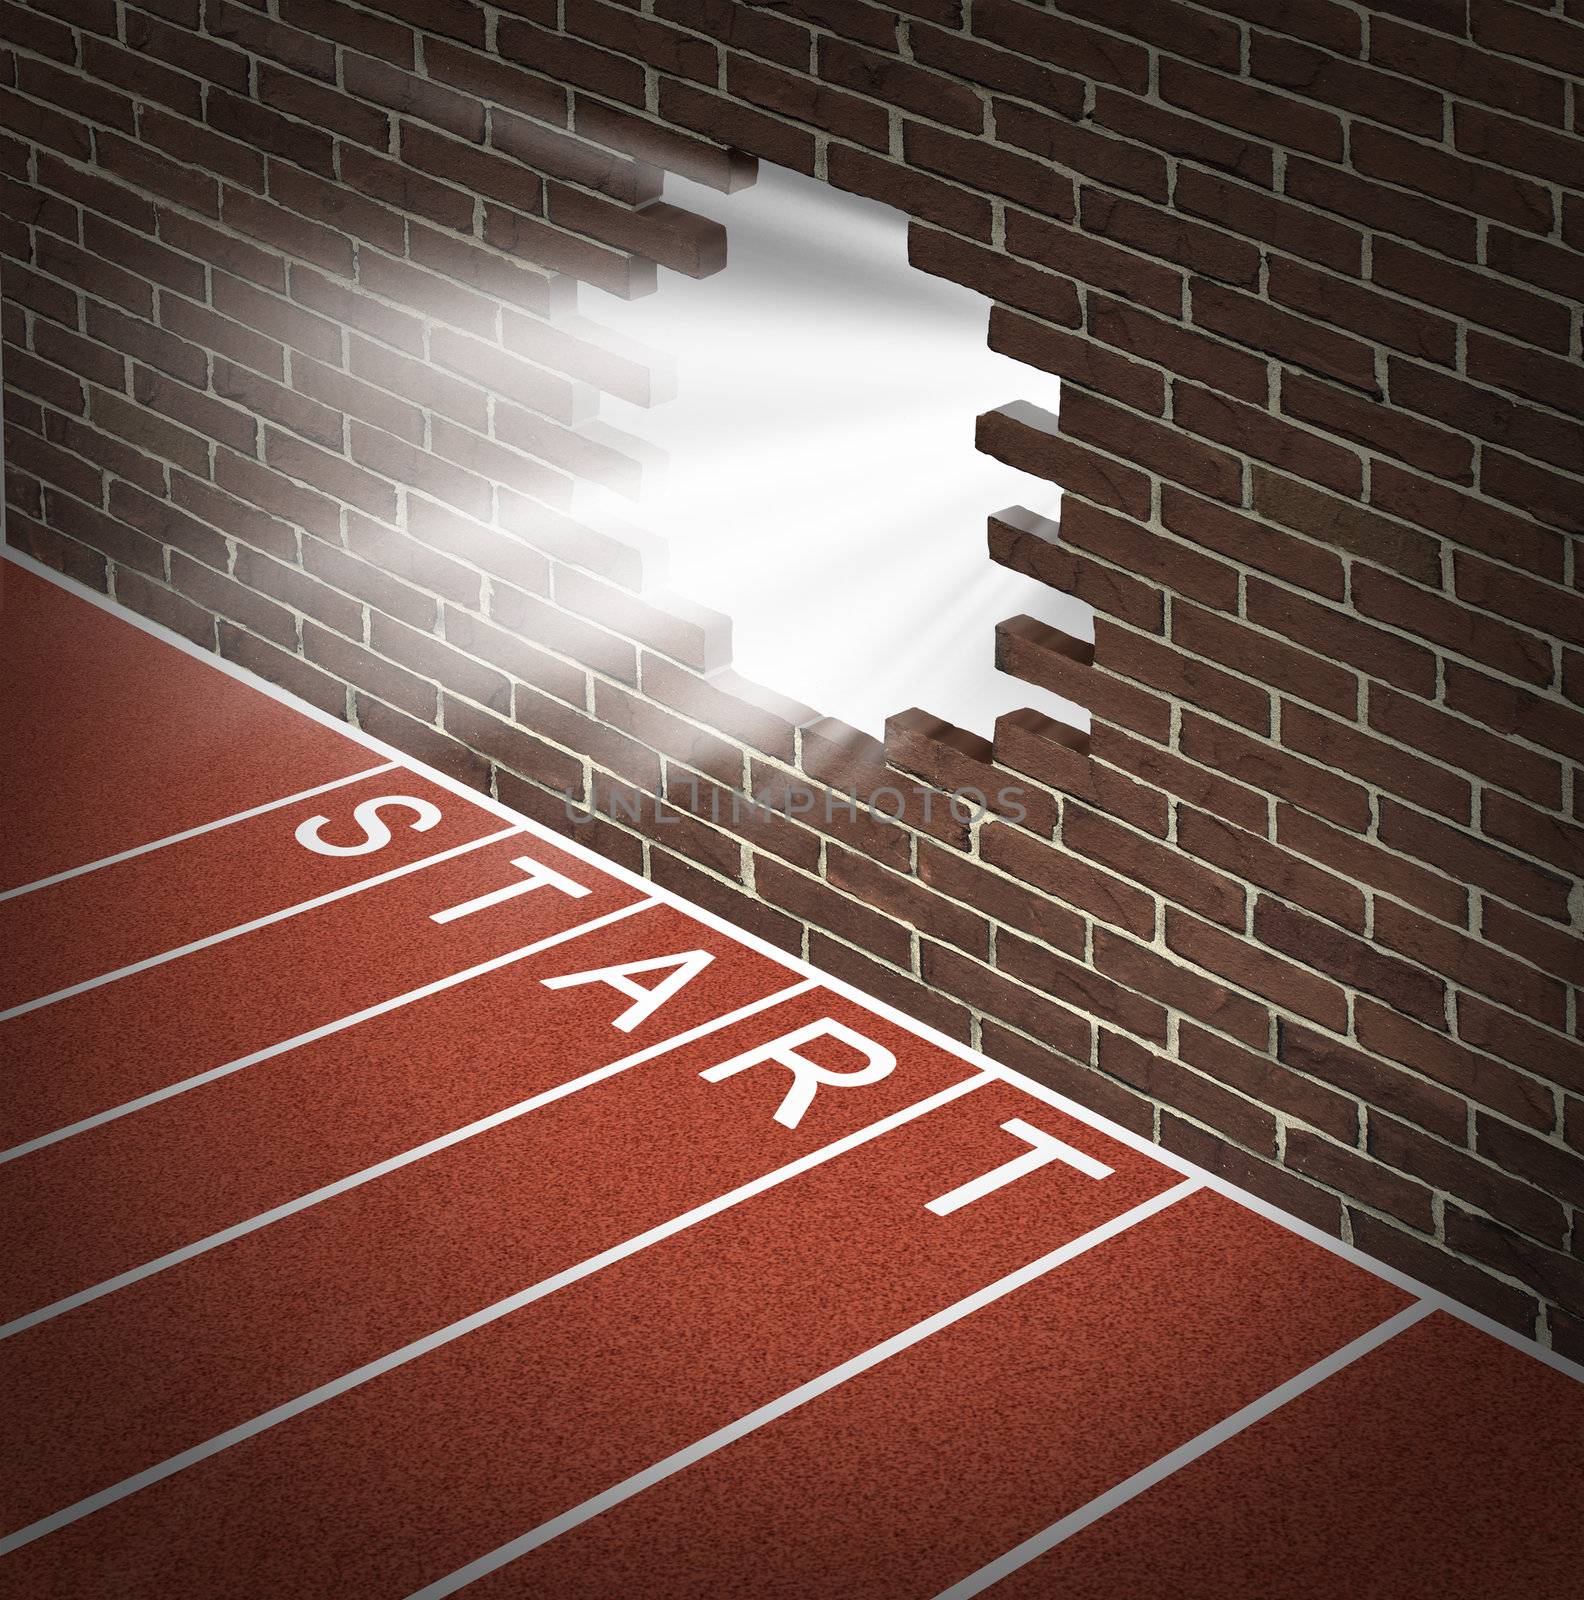 New opportunities and promising business openings at the start of a journey with track and field racing lines and a brick wall with a broken hole glowing with opportunity and success inside.